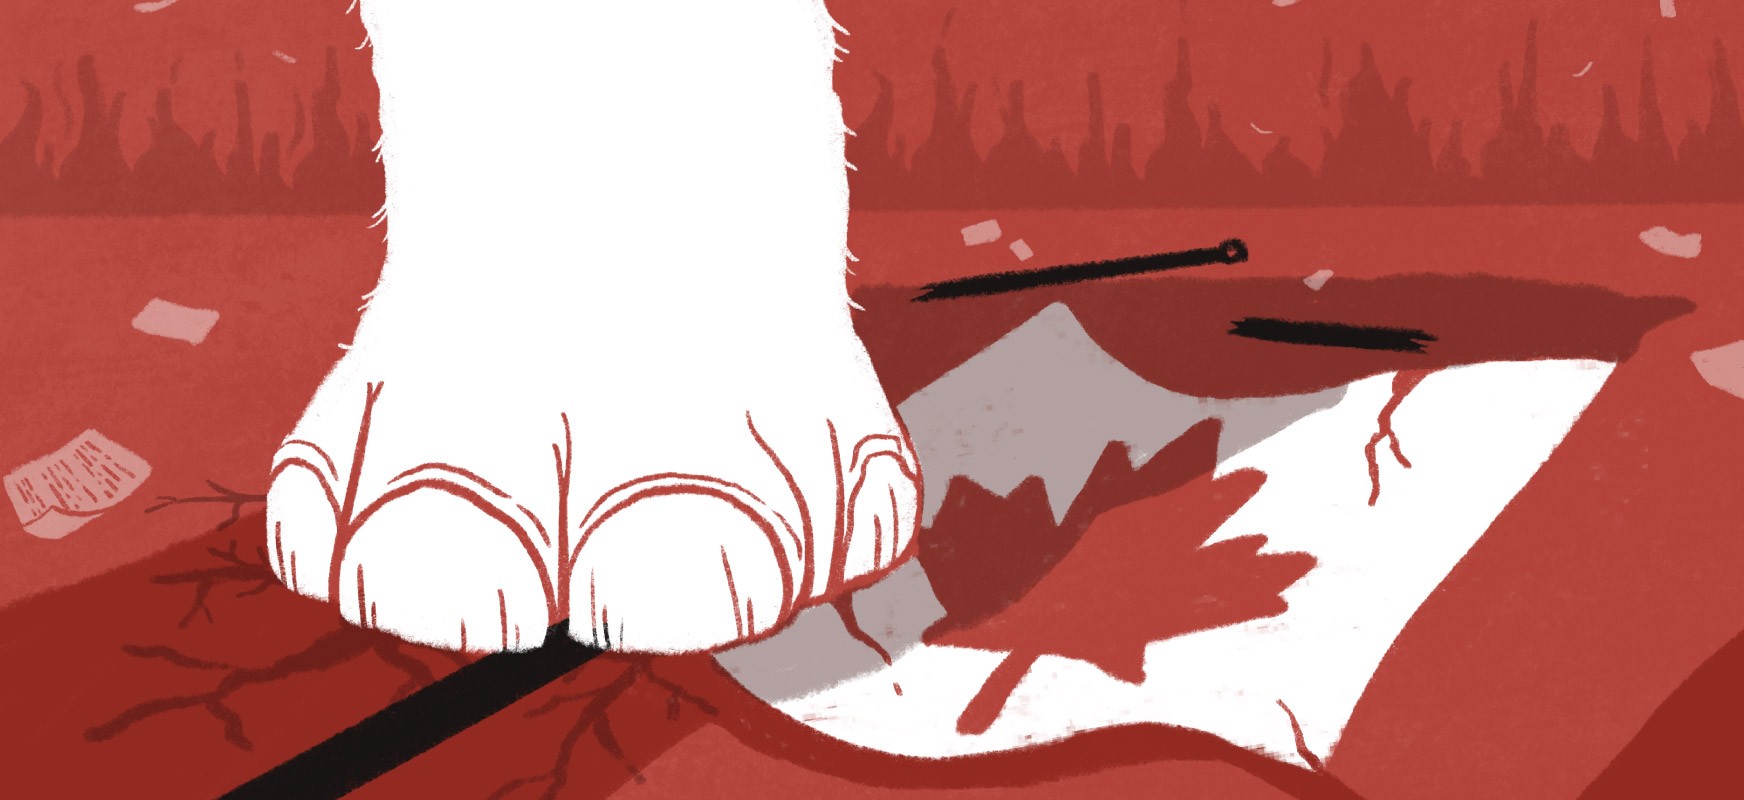 Illustration of a close up of a white elephant's foot stepping on a fallen Canadian flag to symbolize how white supremacy is dangerous to Canada.